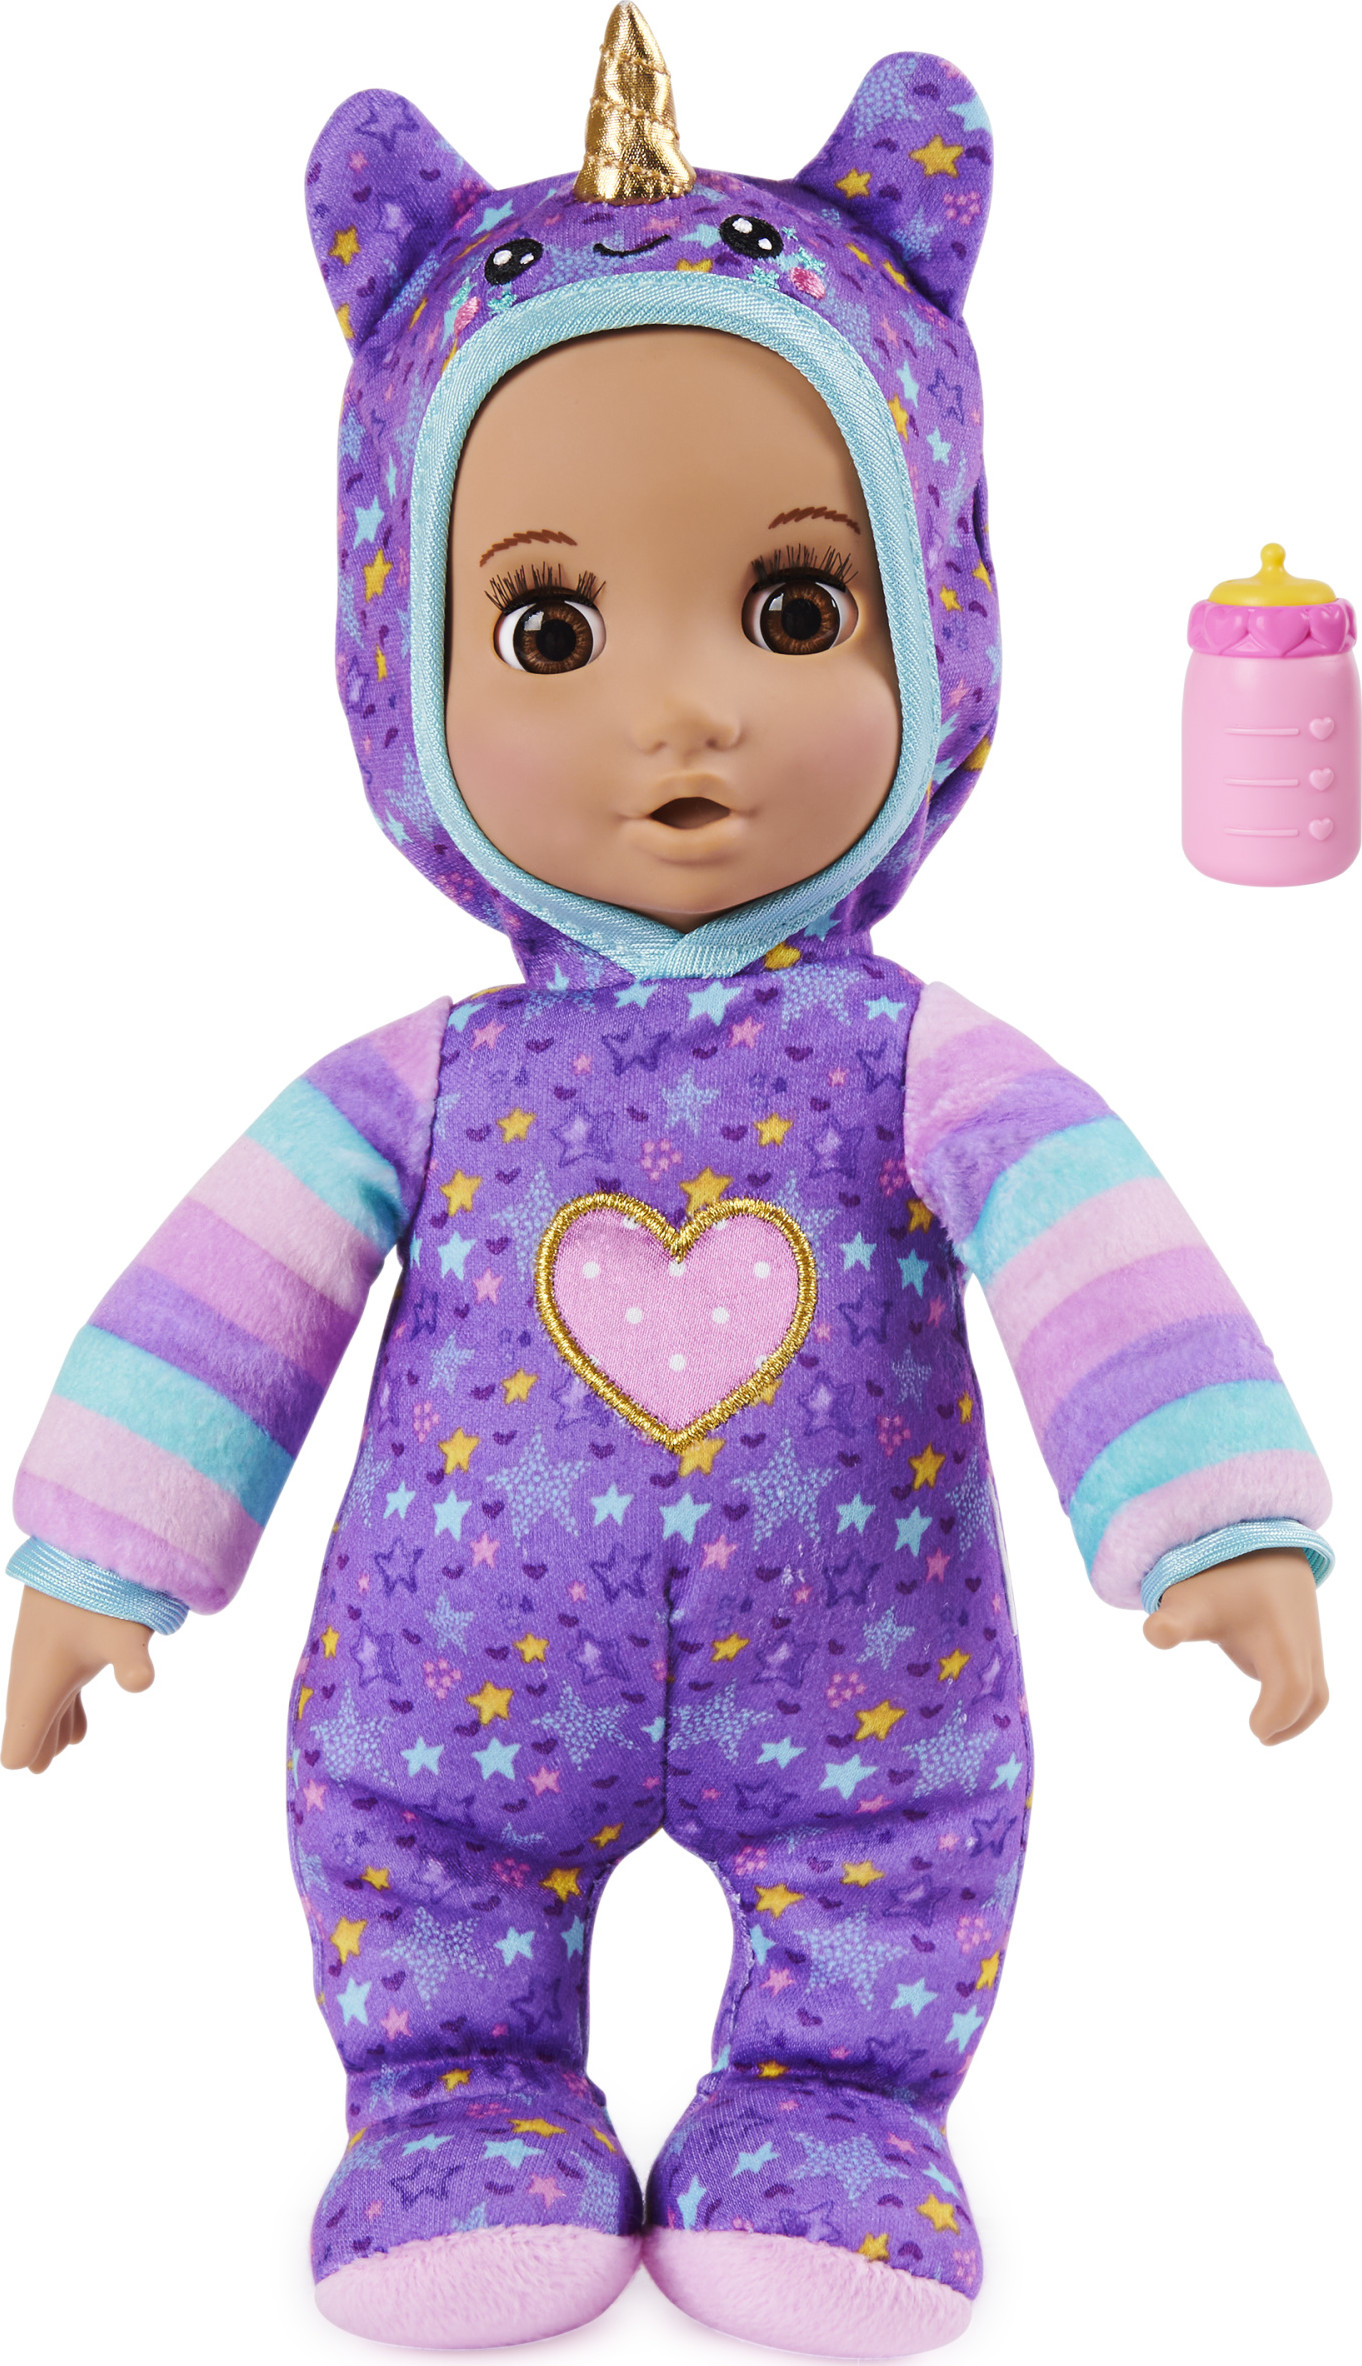 Luvzies by Luvabella, Unicorn Onesie 11-inch Cuddly Baby Doll - image 1 of 5